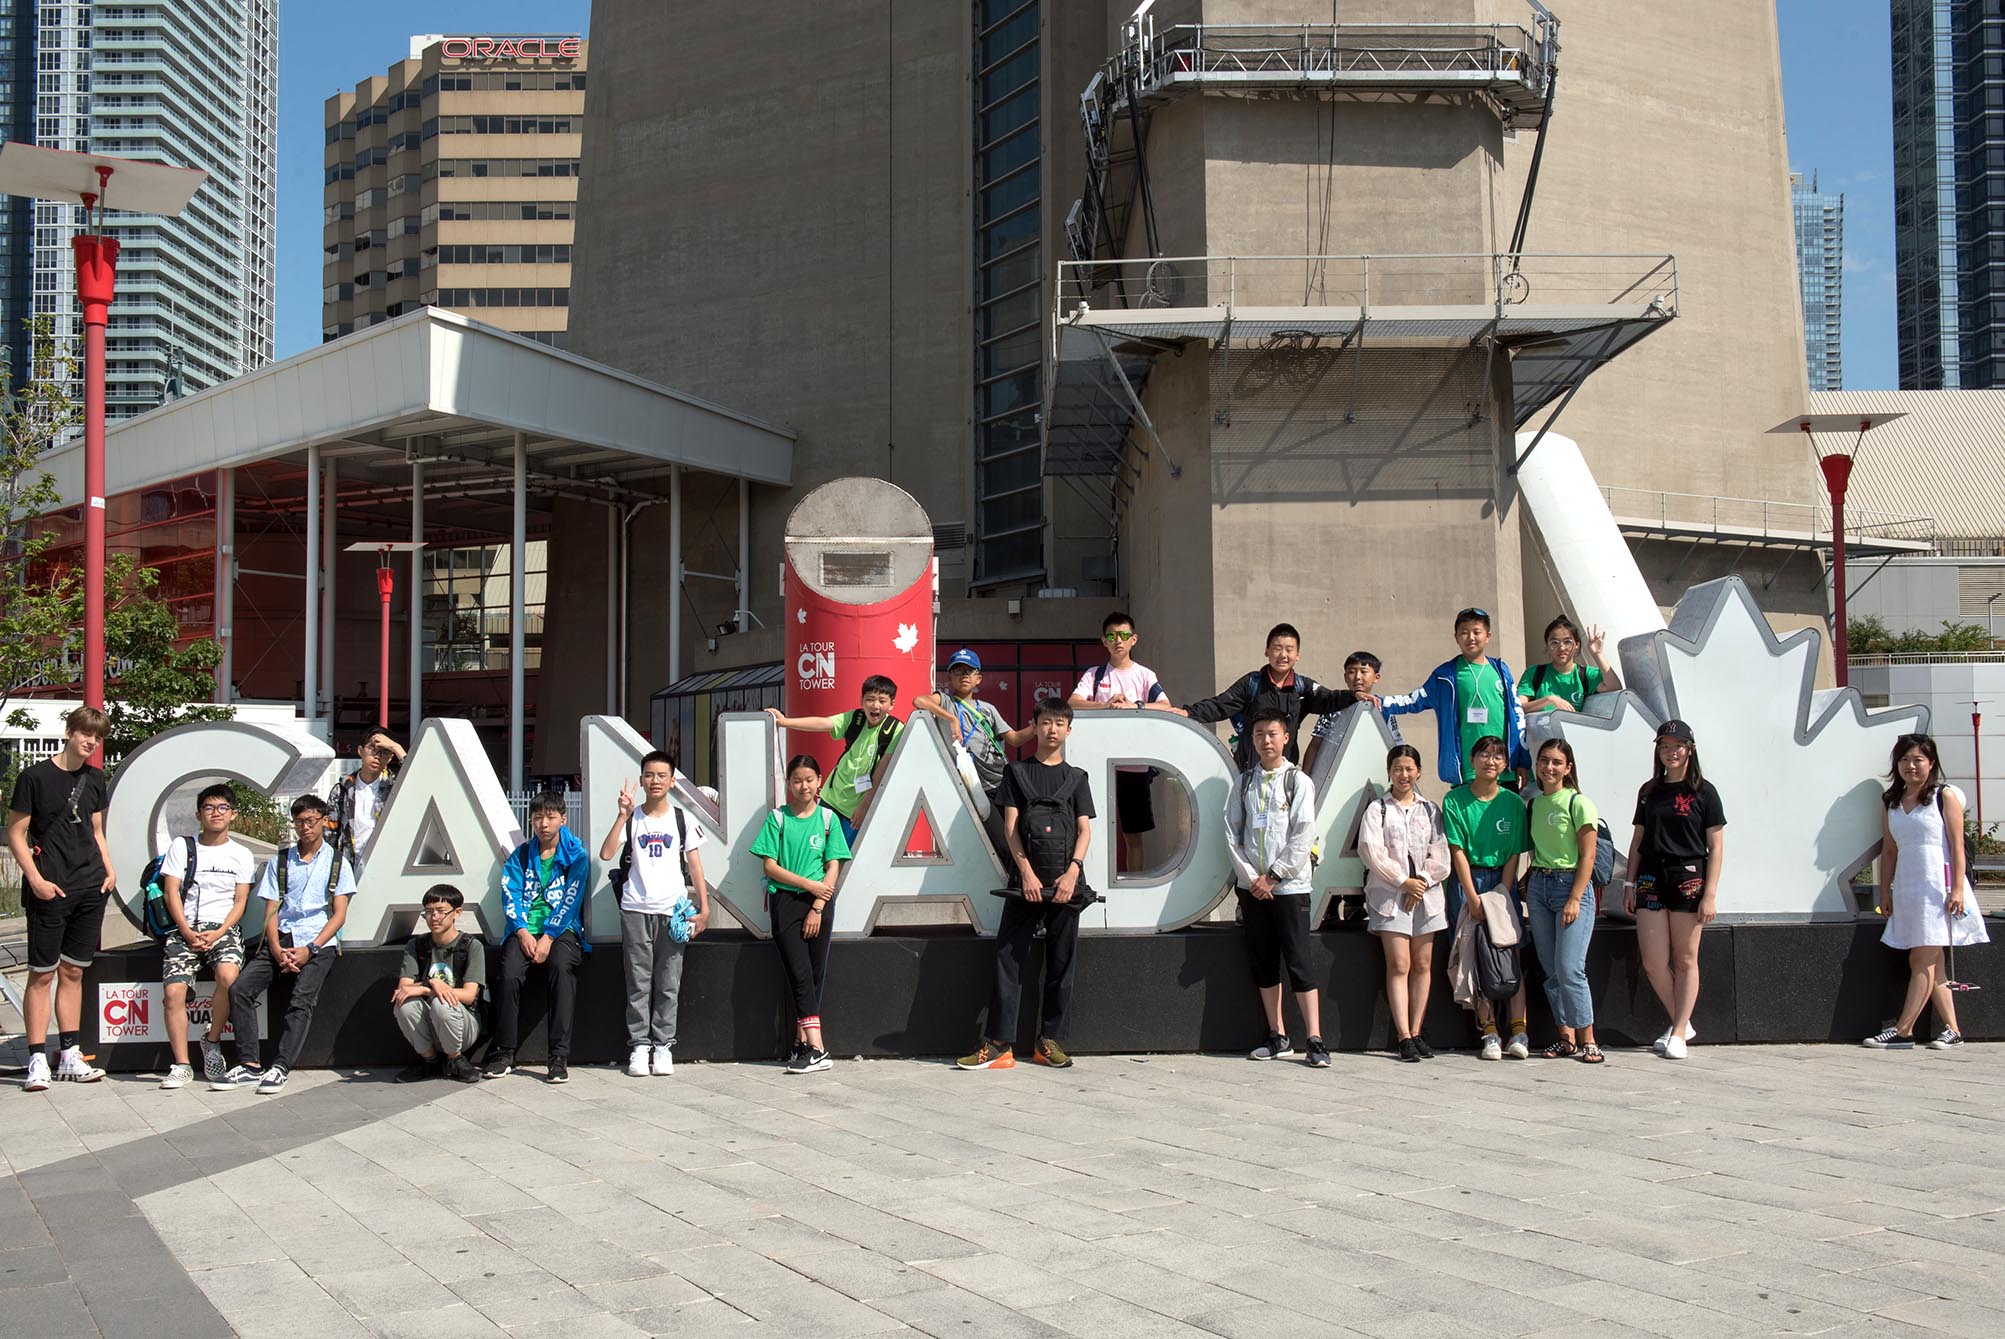 Students standing in front of CANADA sign in Toronto Open Gallery